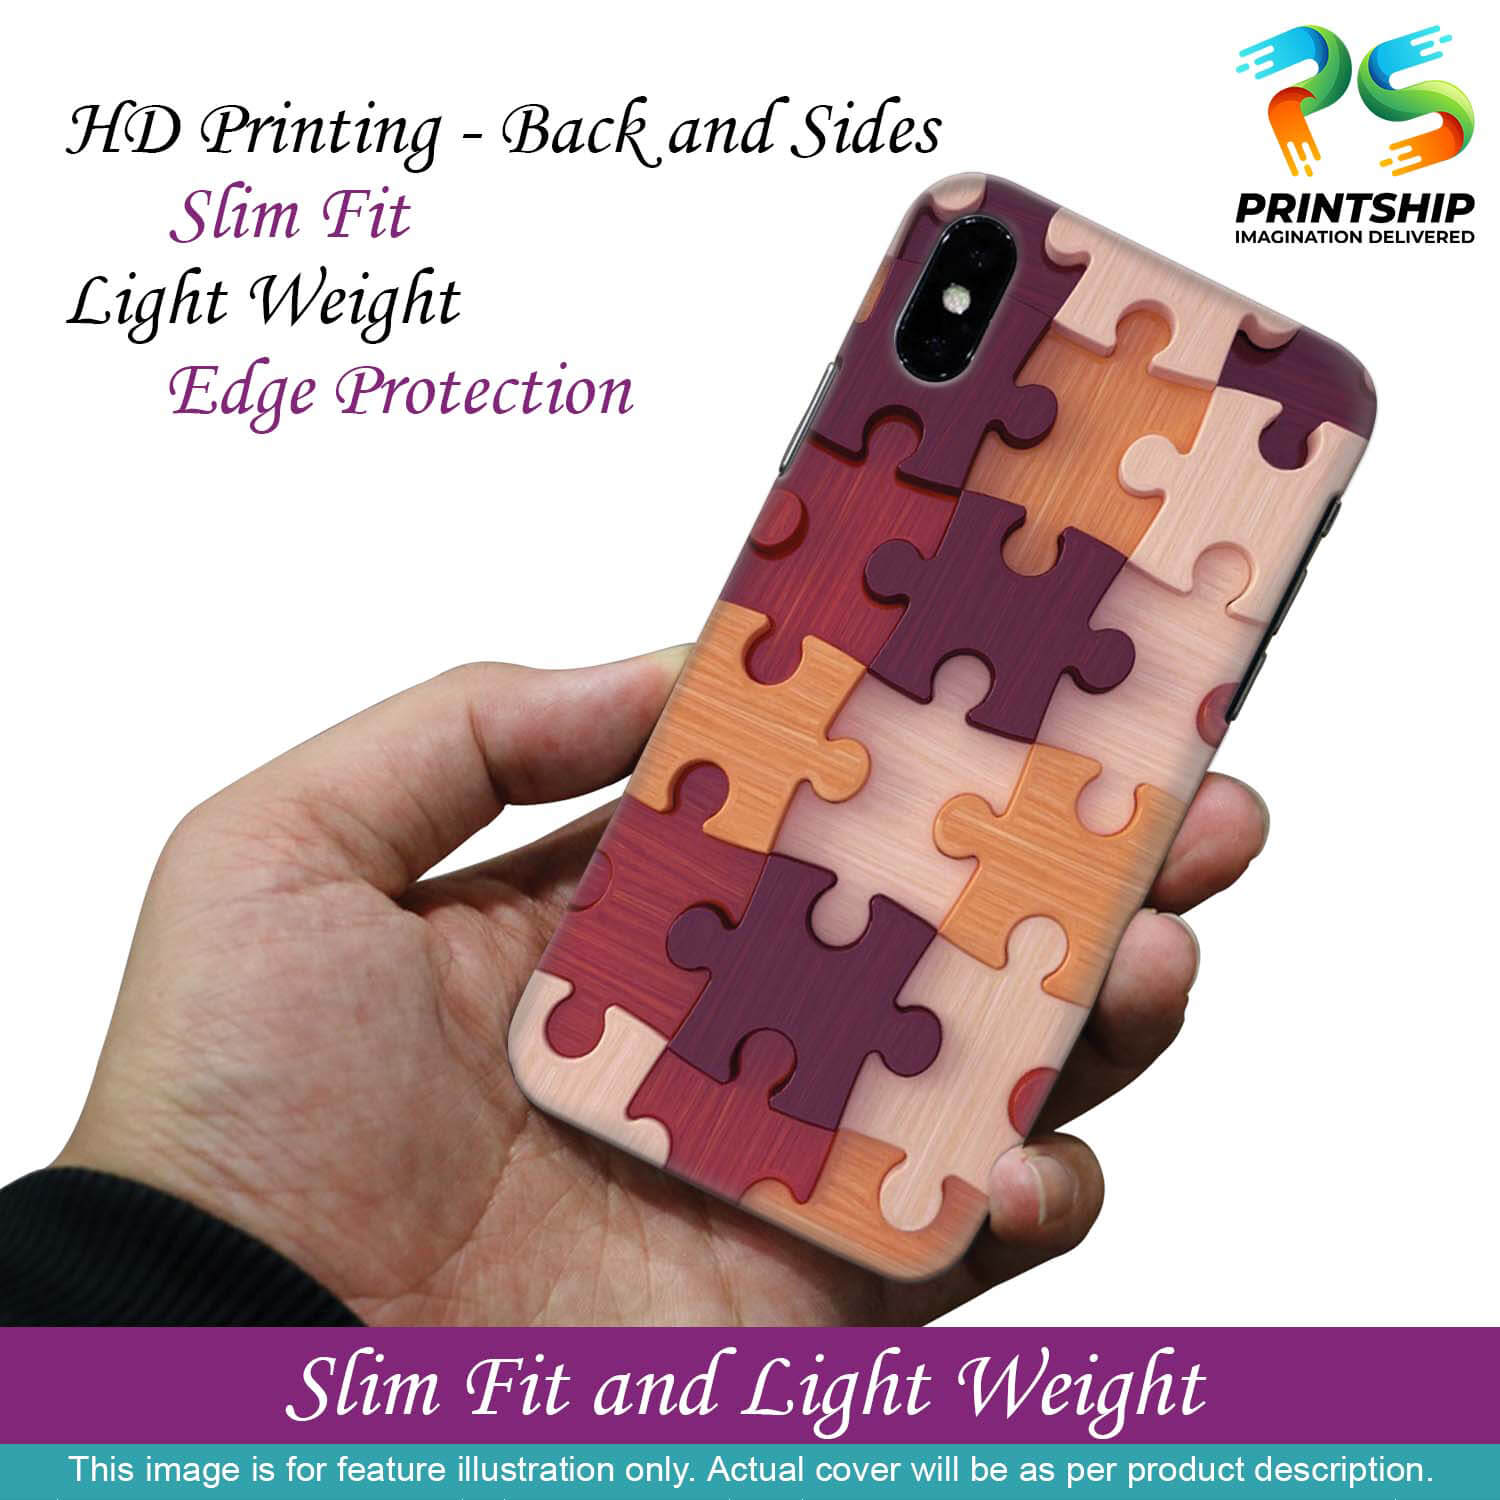 D2046-Wooden Jigsaw Back Cover for Vivo Y50